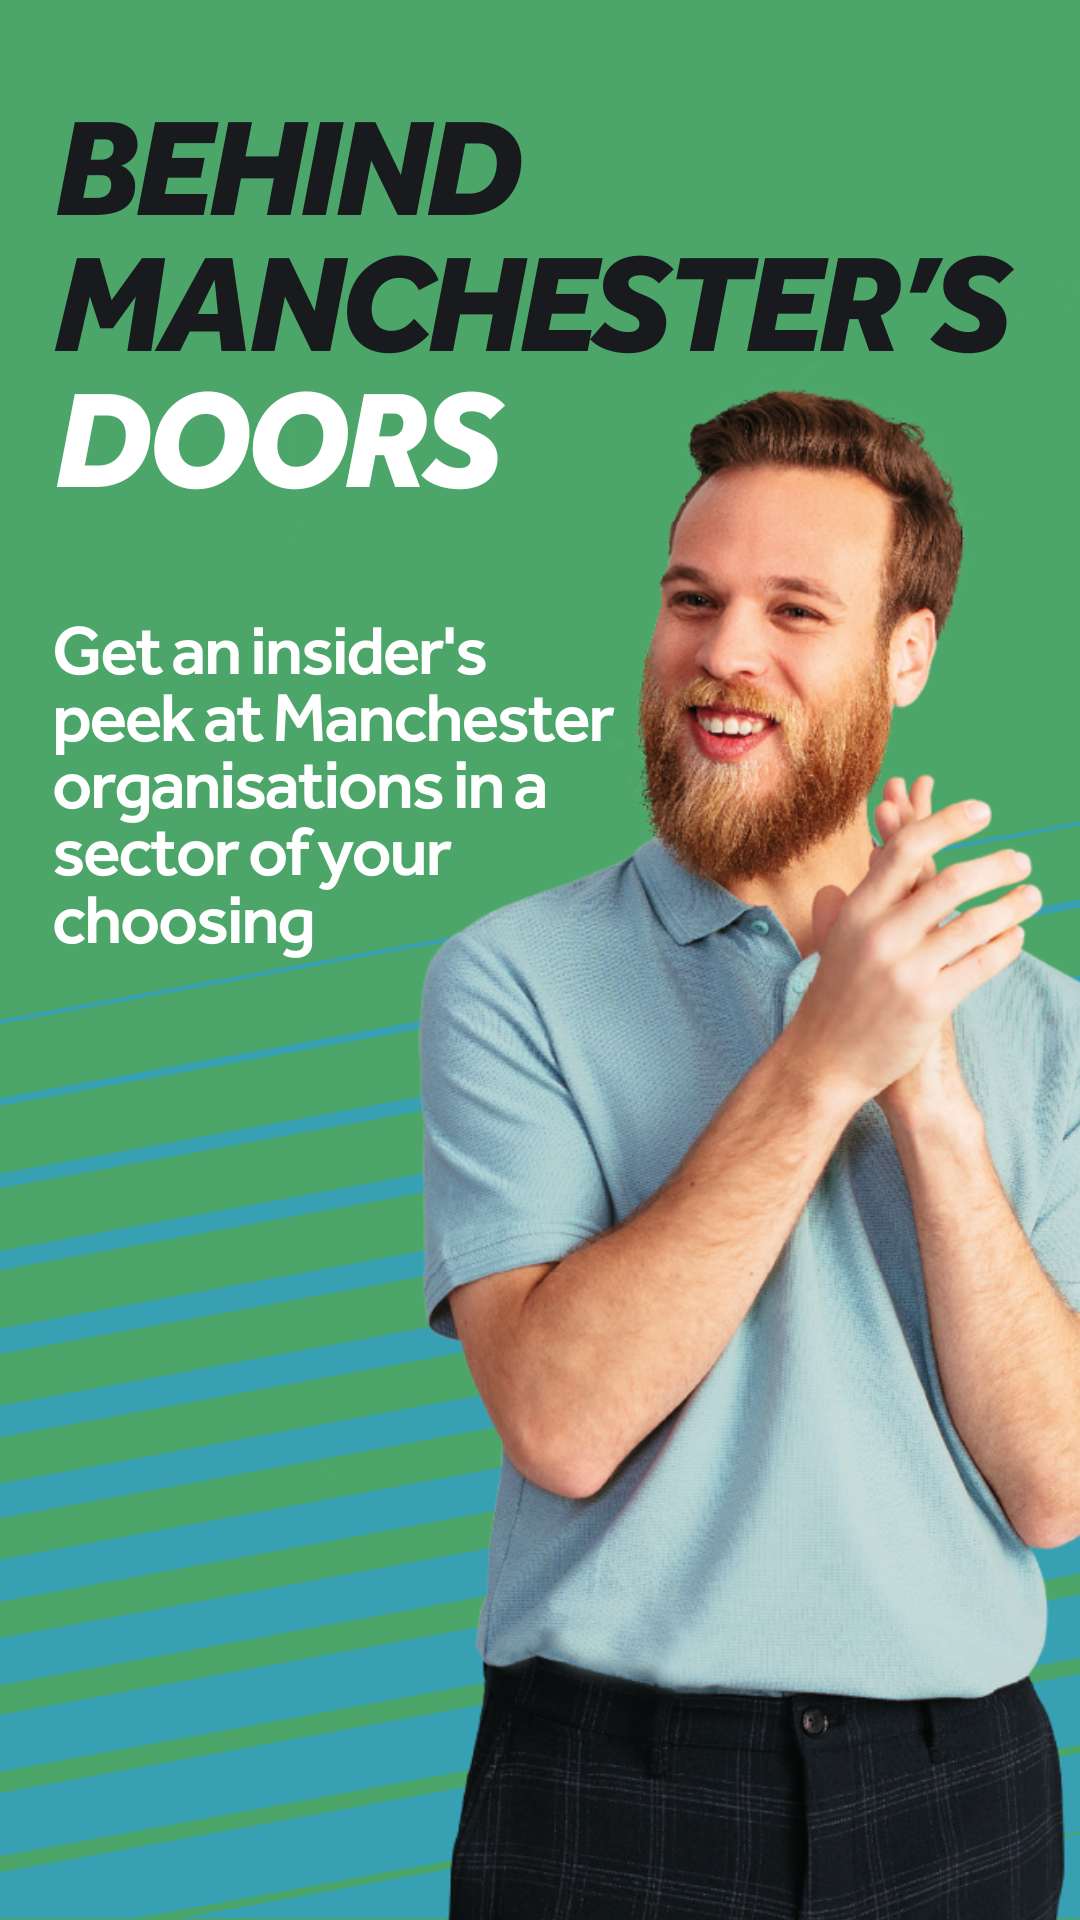 Student smiling with wording promoting Behind Manchester's Doors